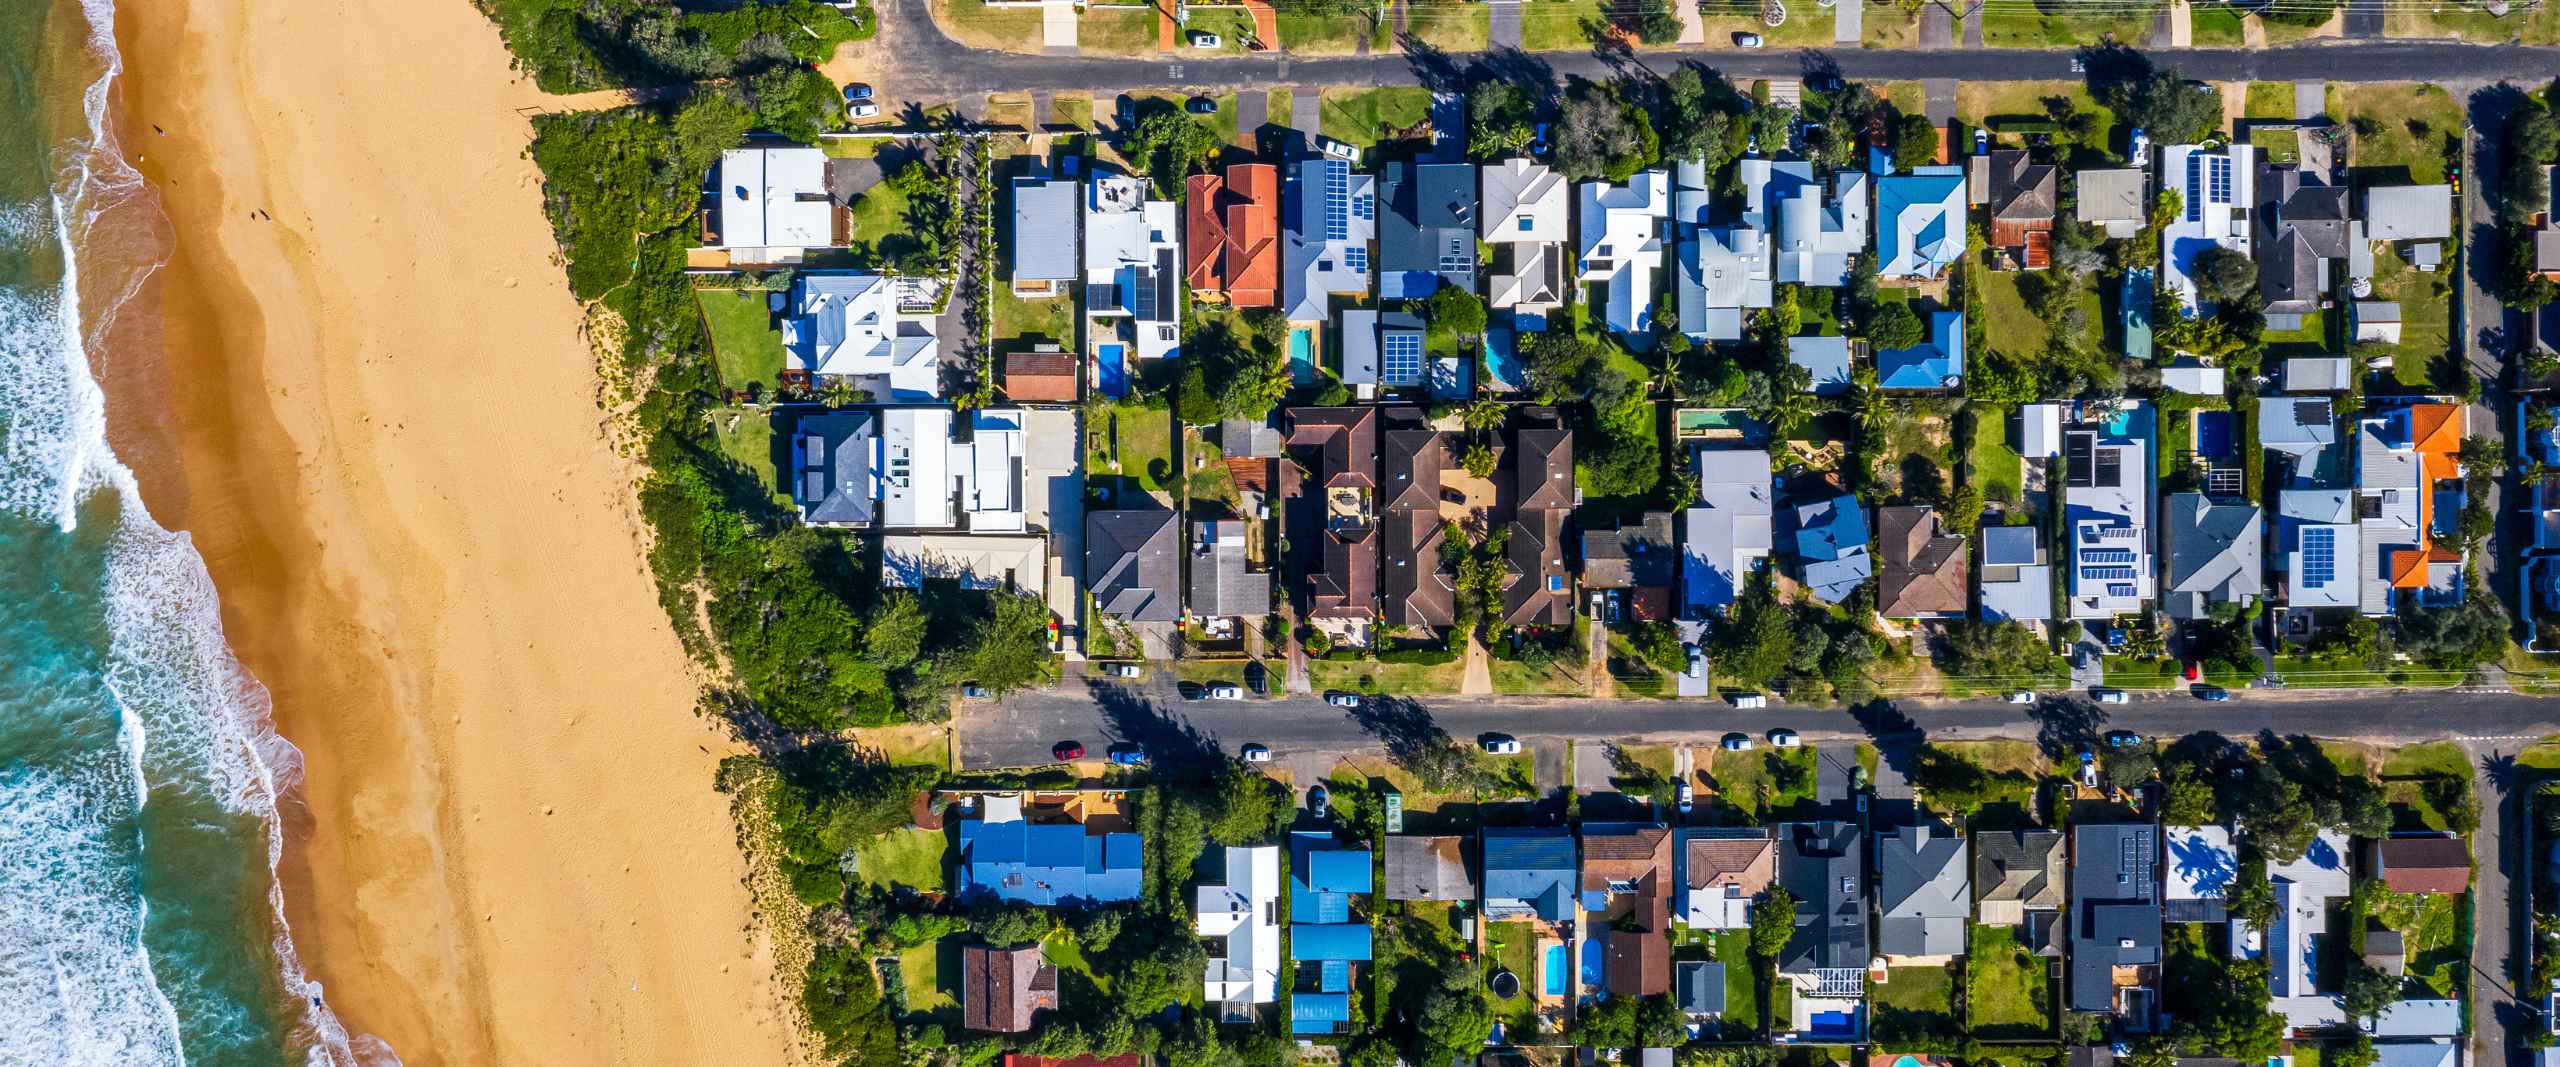 birds eye view of houses